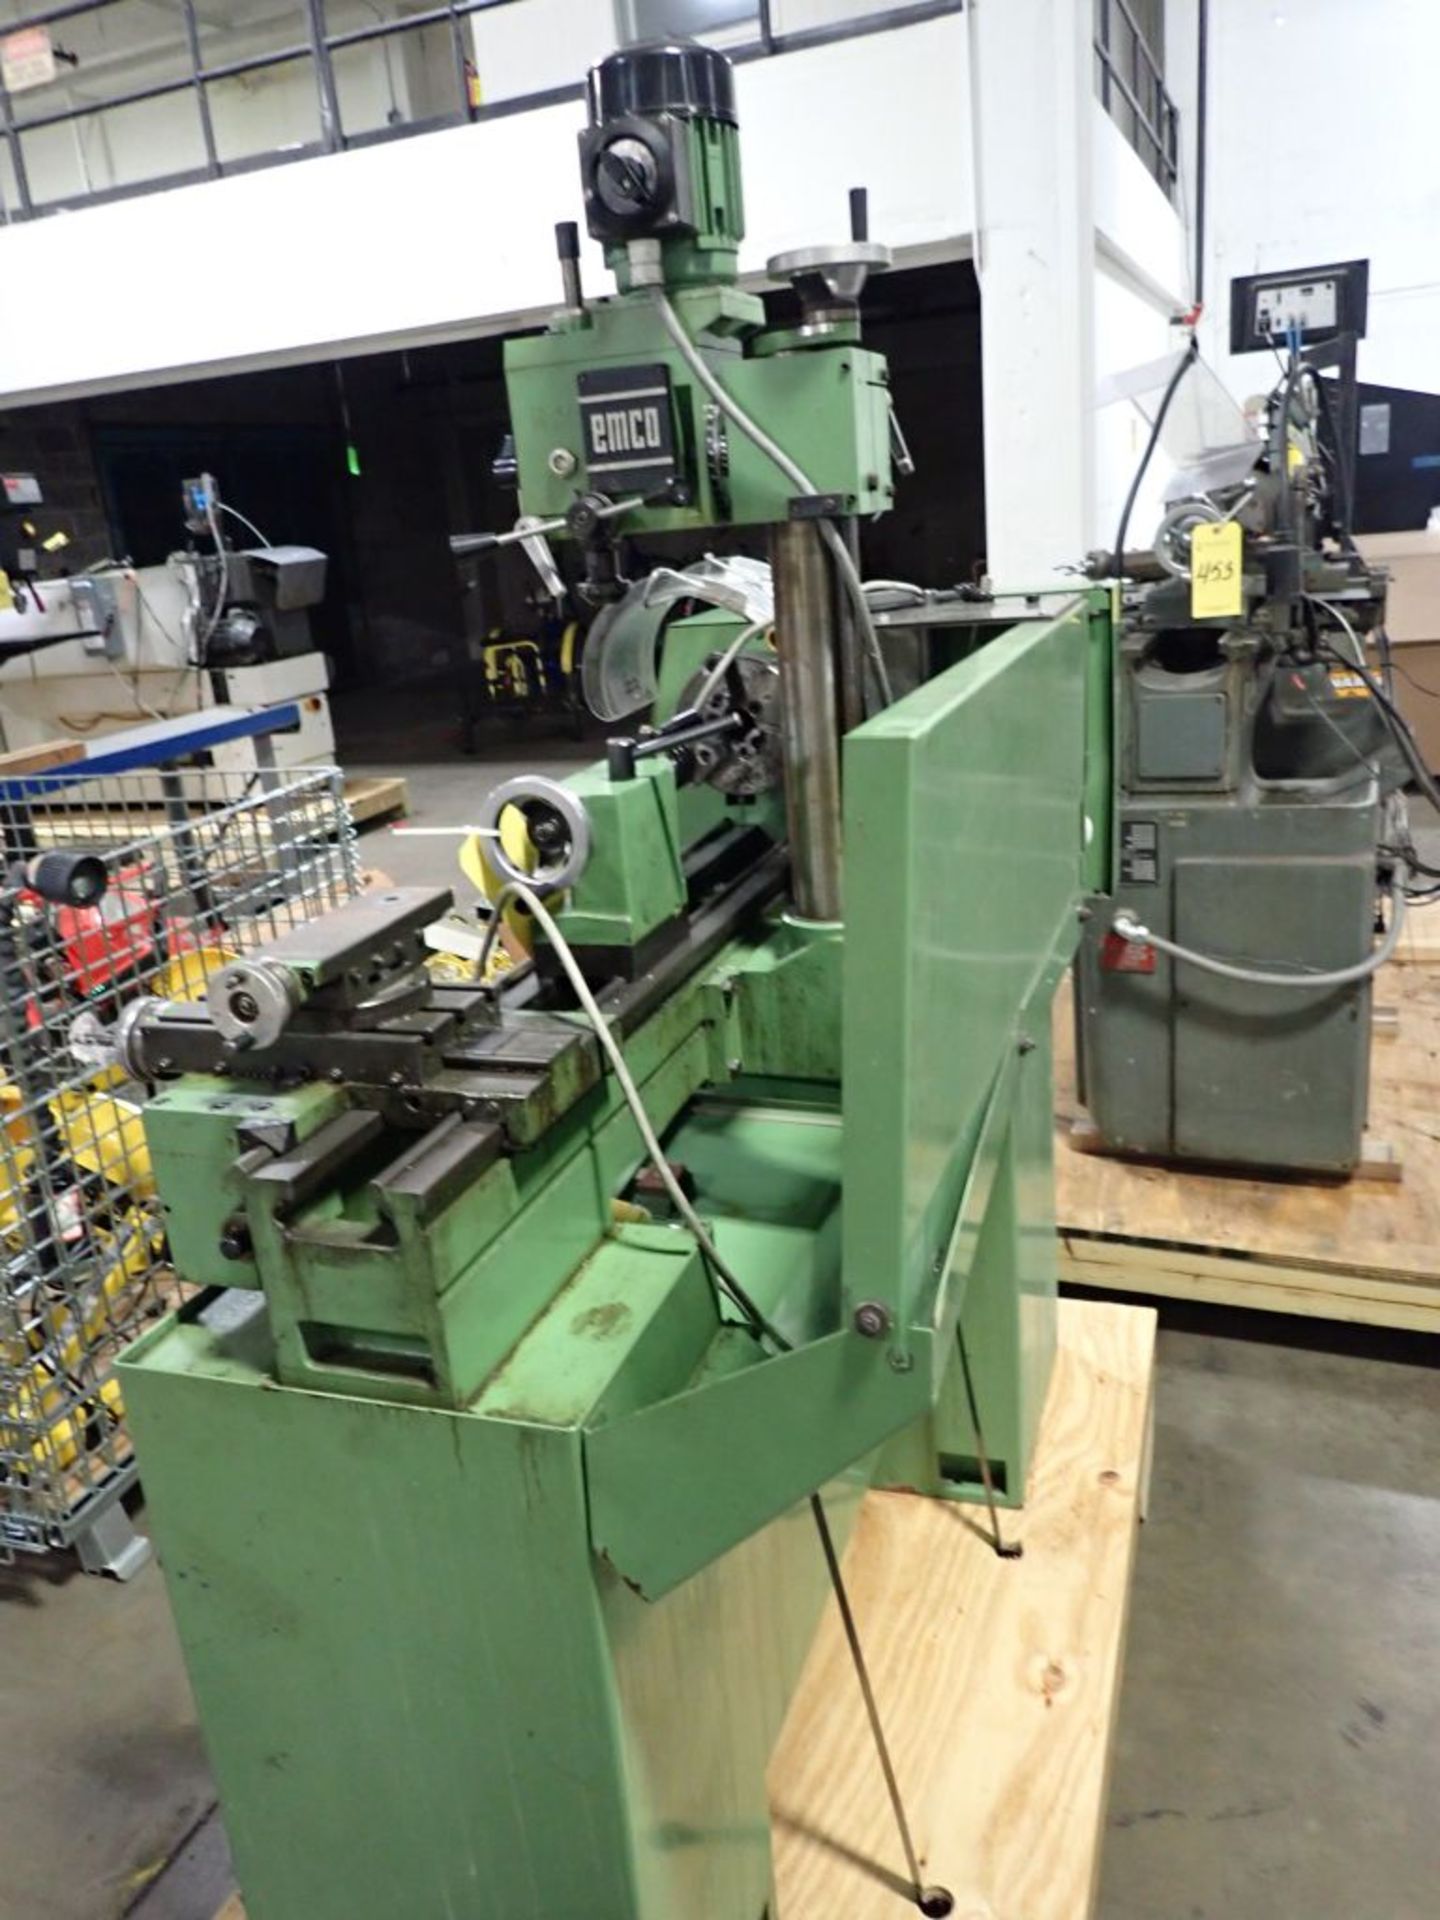 EMCO Compact 10 Lathe/Mill | 10 x 24 Swing; Mill Head; 3-Jaw Chuck; Tag: 241452 | Limited Forklift - Image 6 of 7